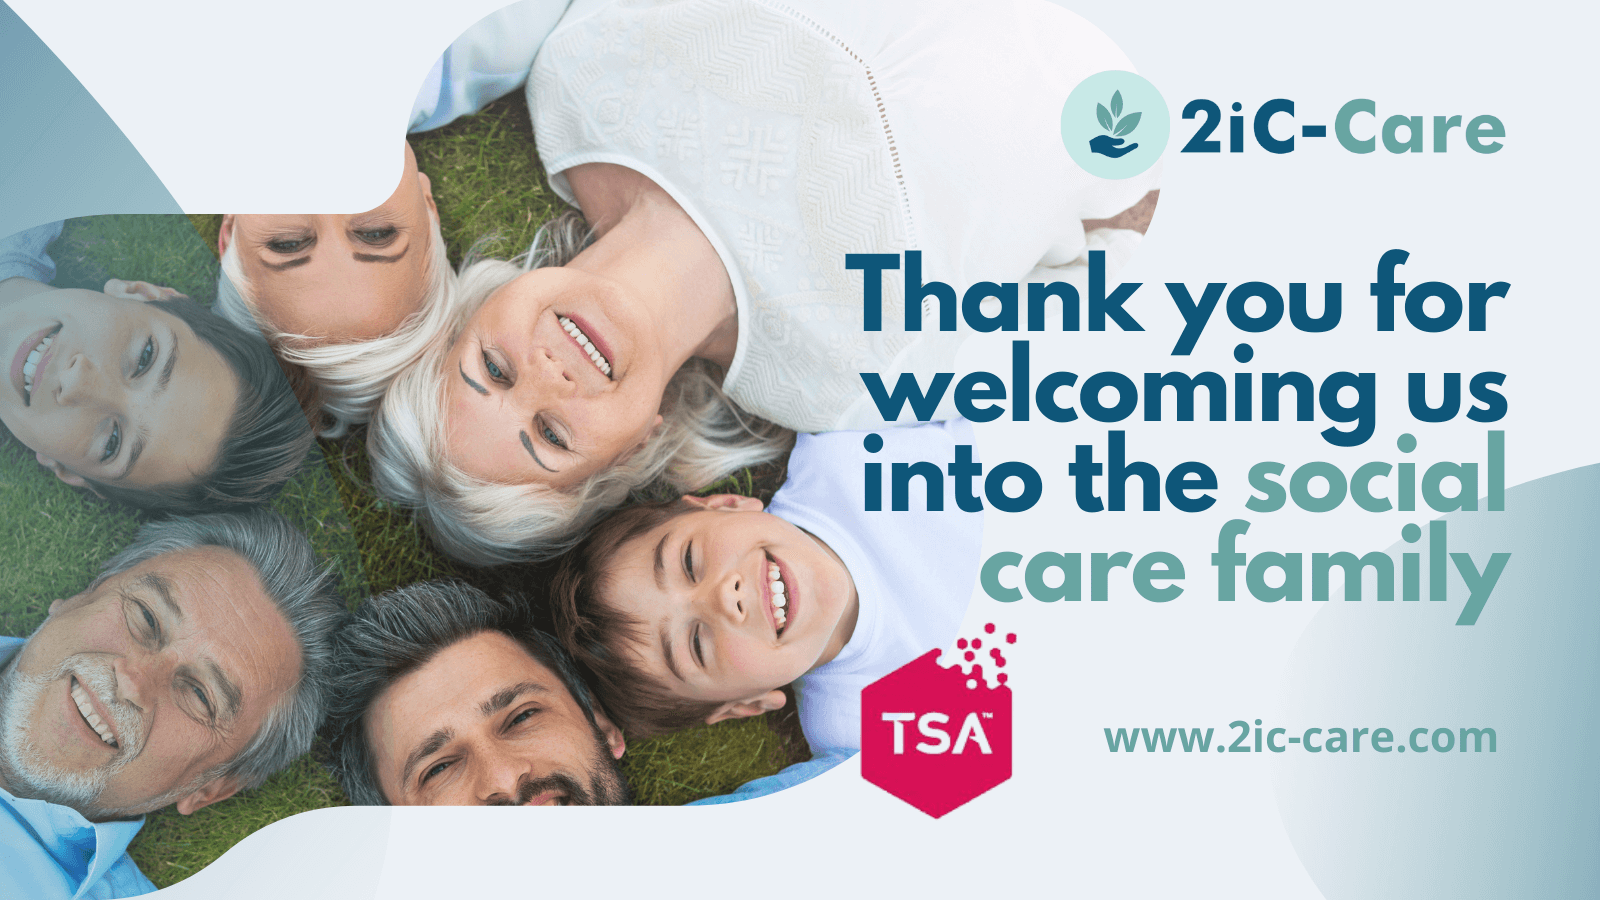 2iC-Care is delighted to join the TSA social care family with our highly innovative software solution.